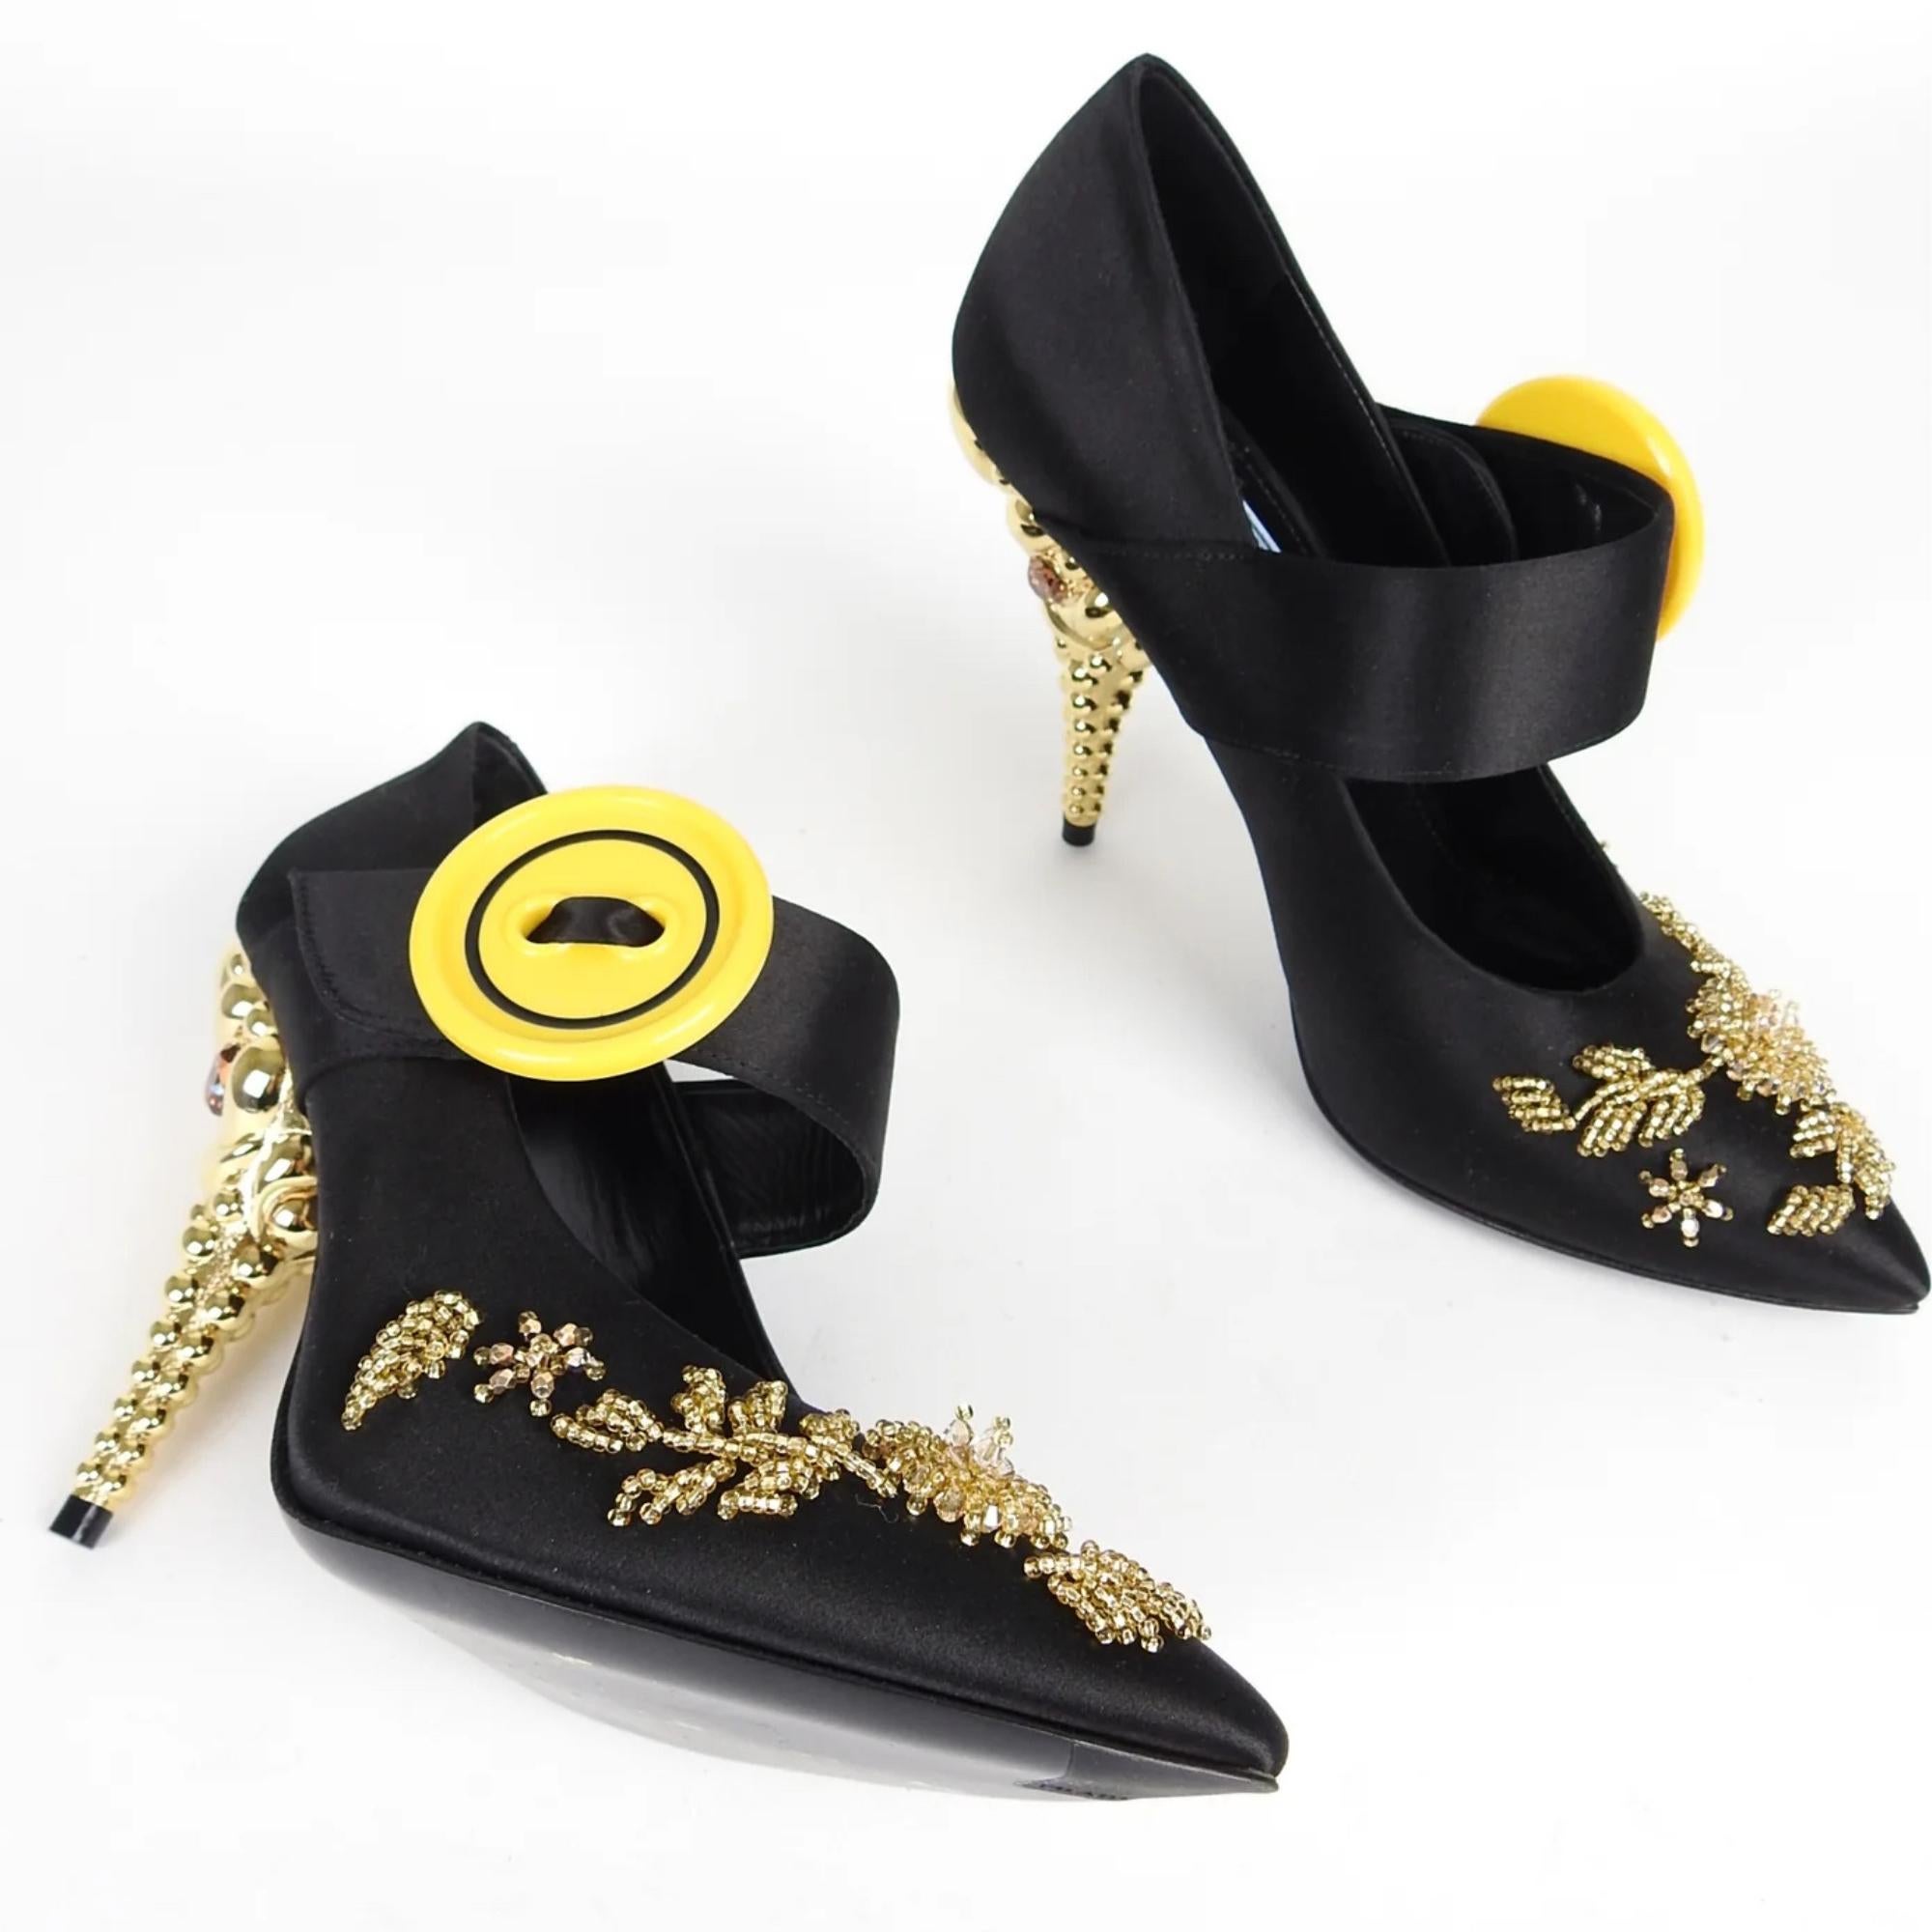 Prada Gold Beads & Button Embellished Black Satin Heels (Us 6.5 37) In Excellent Condition For Sale In Montreal, Quebec